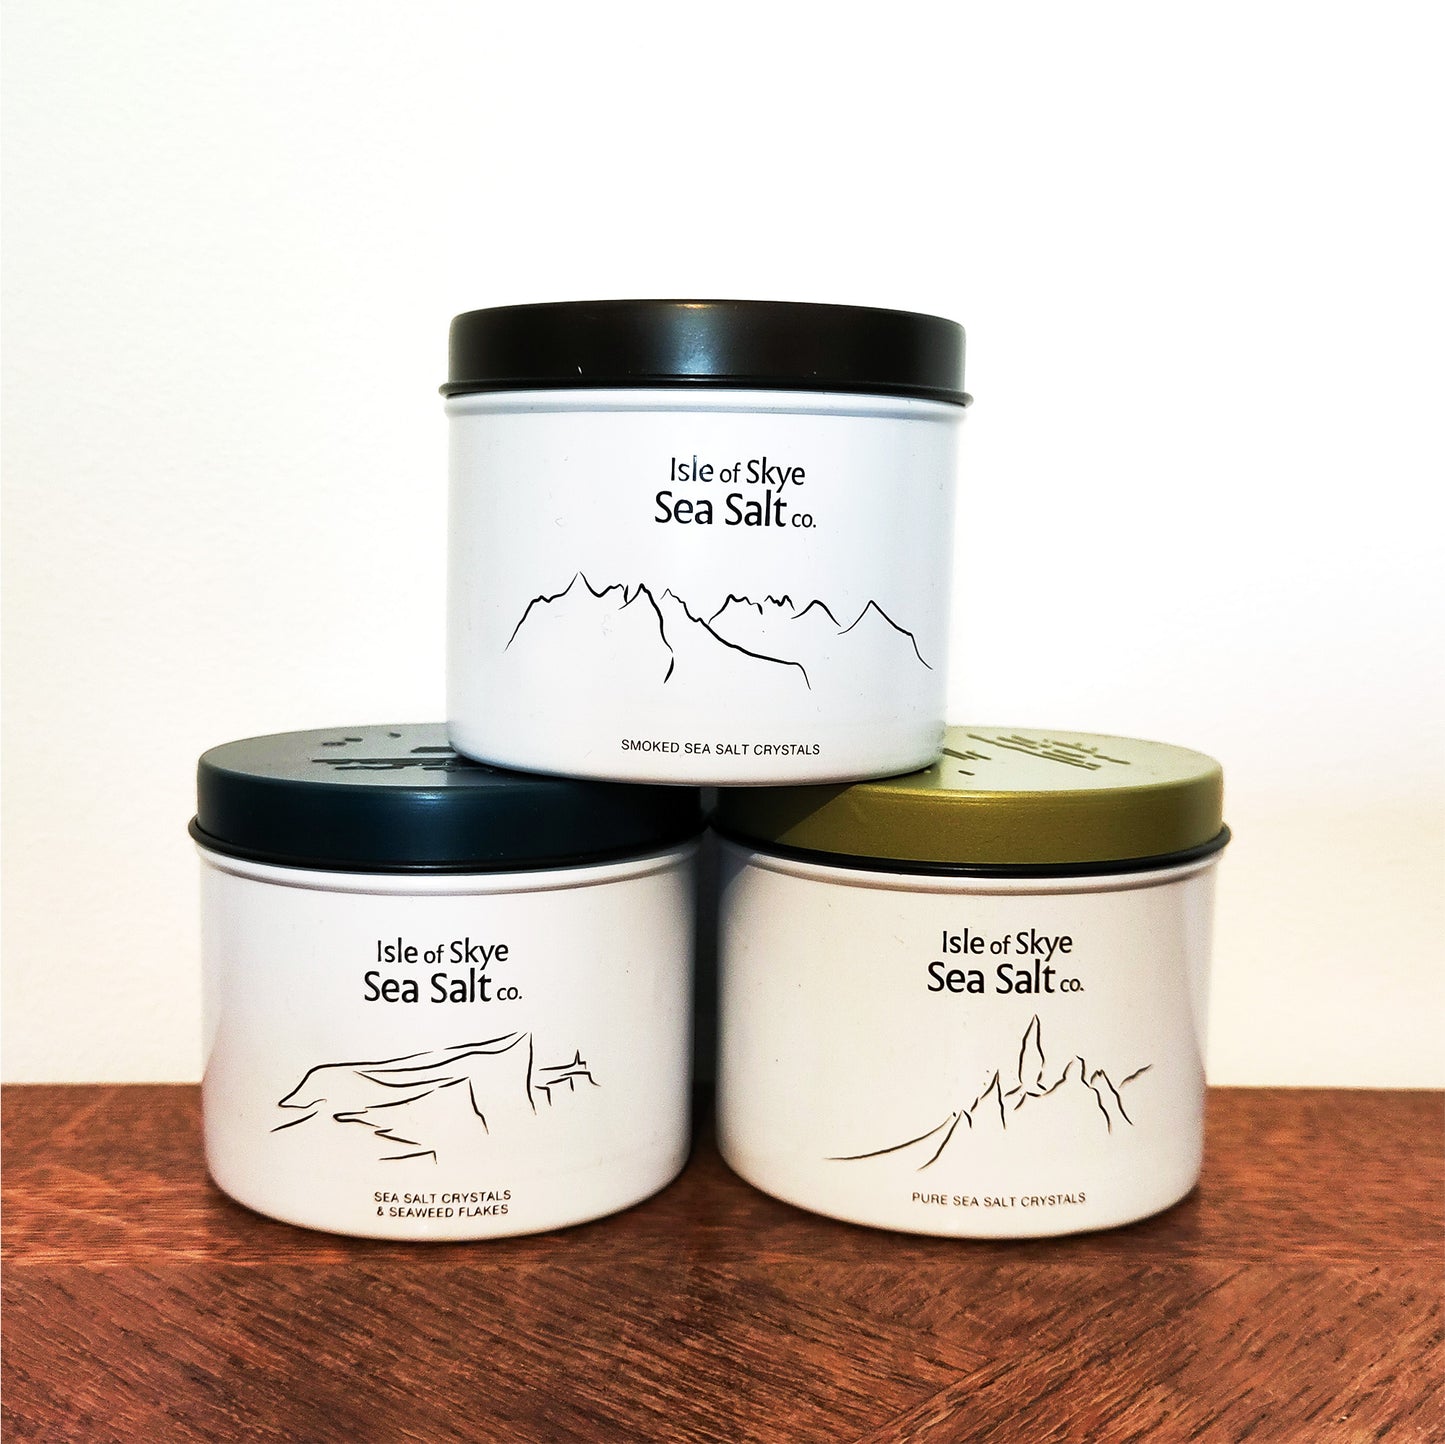 A Taste of Skye - 3 x 120g Natural and Flavored Sea Salts Gift Set